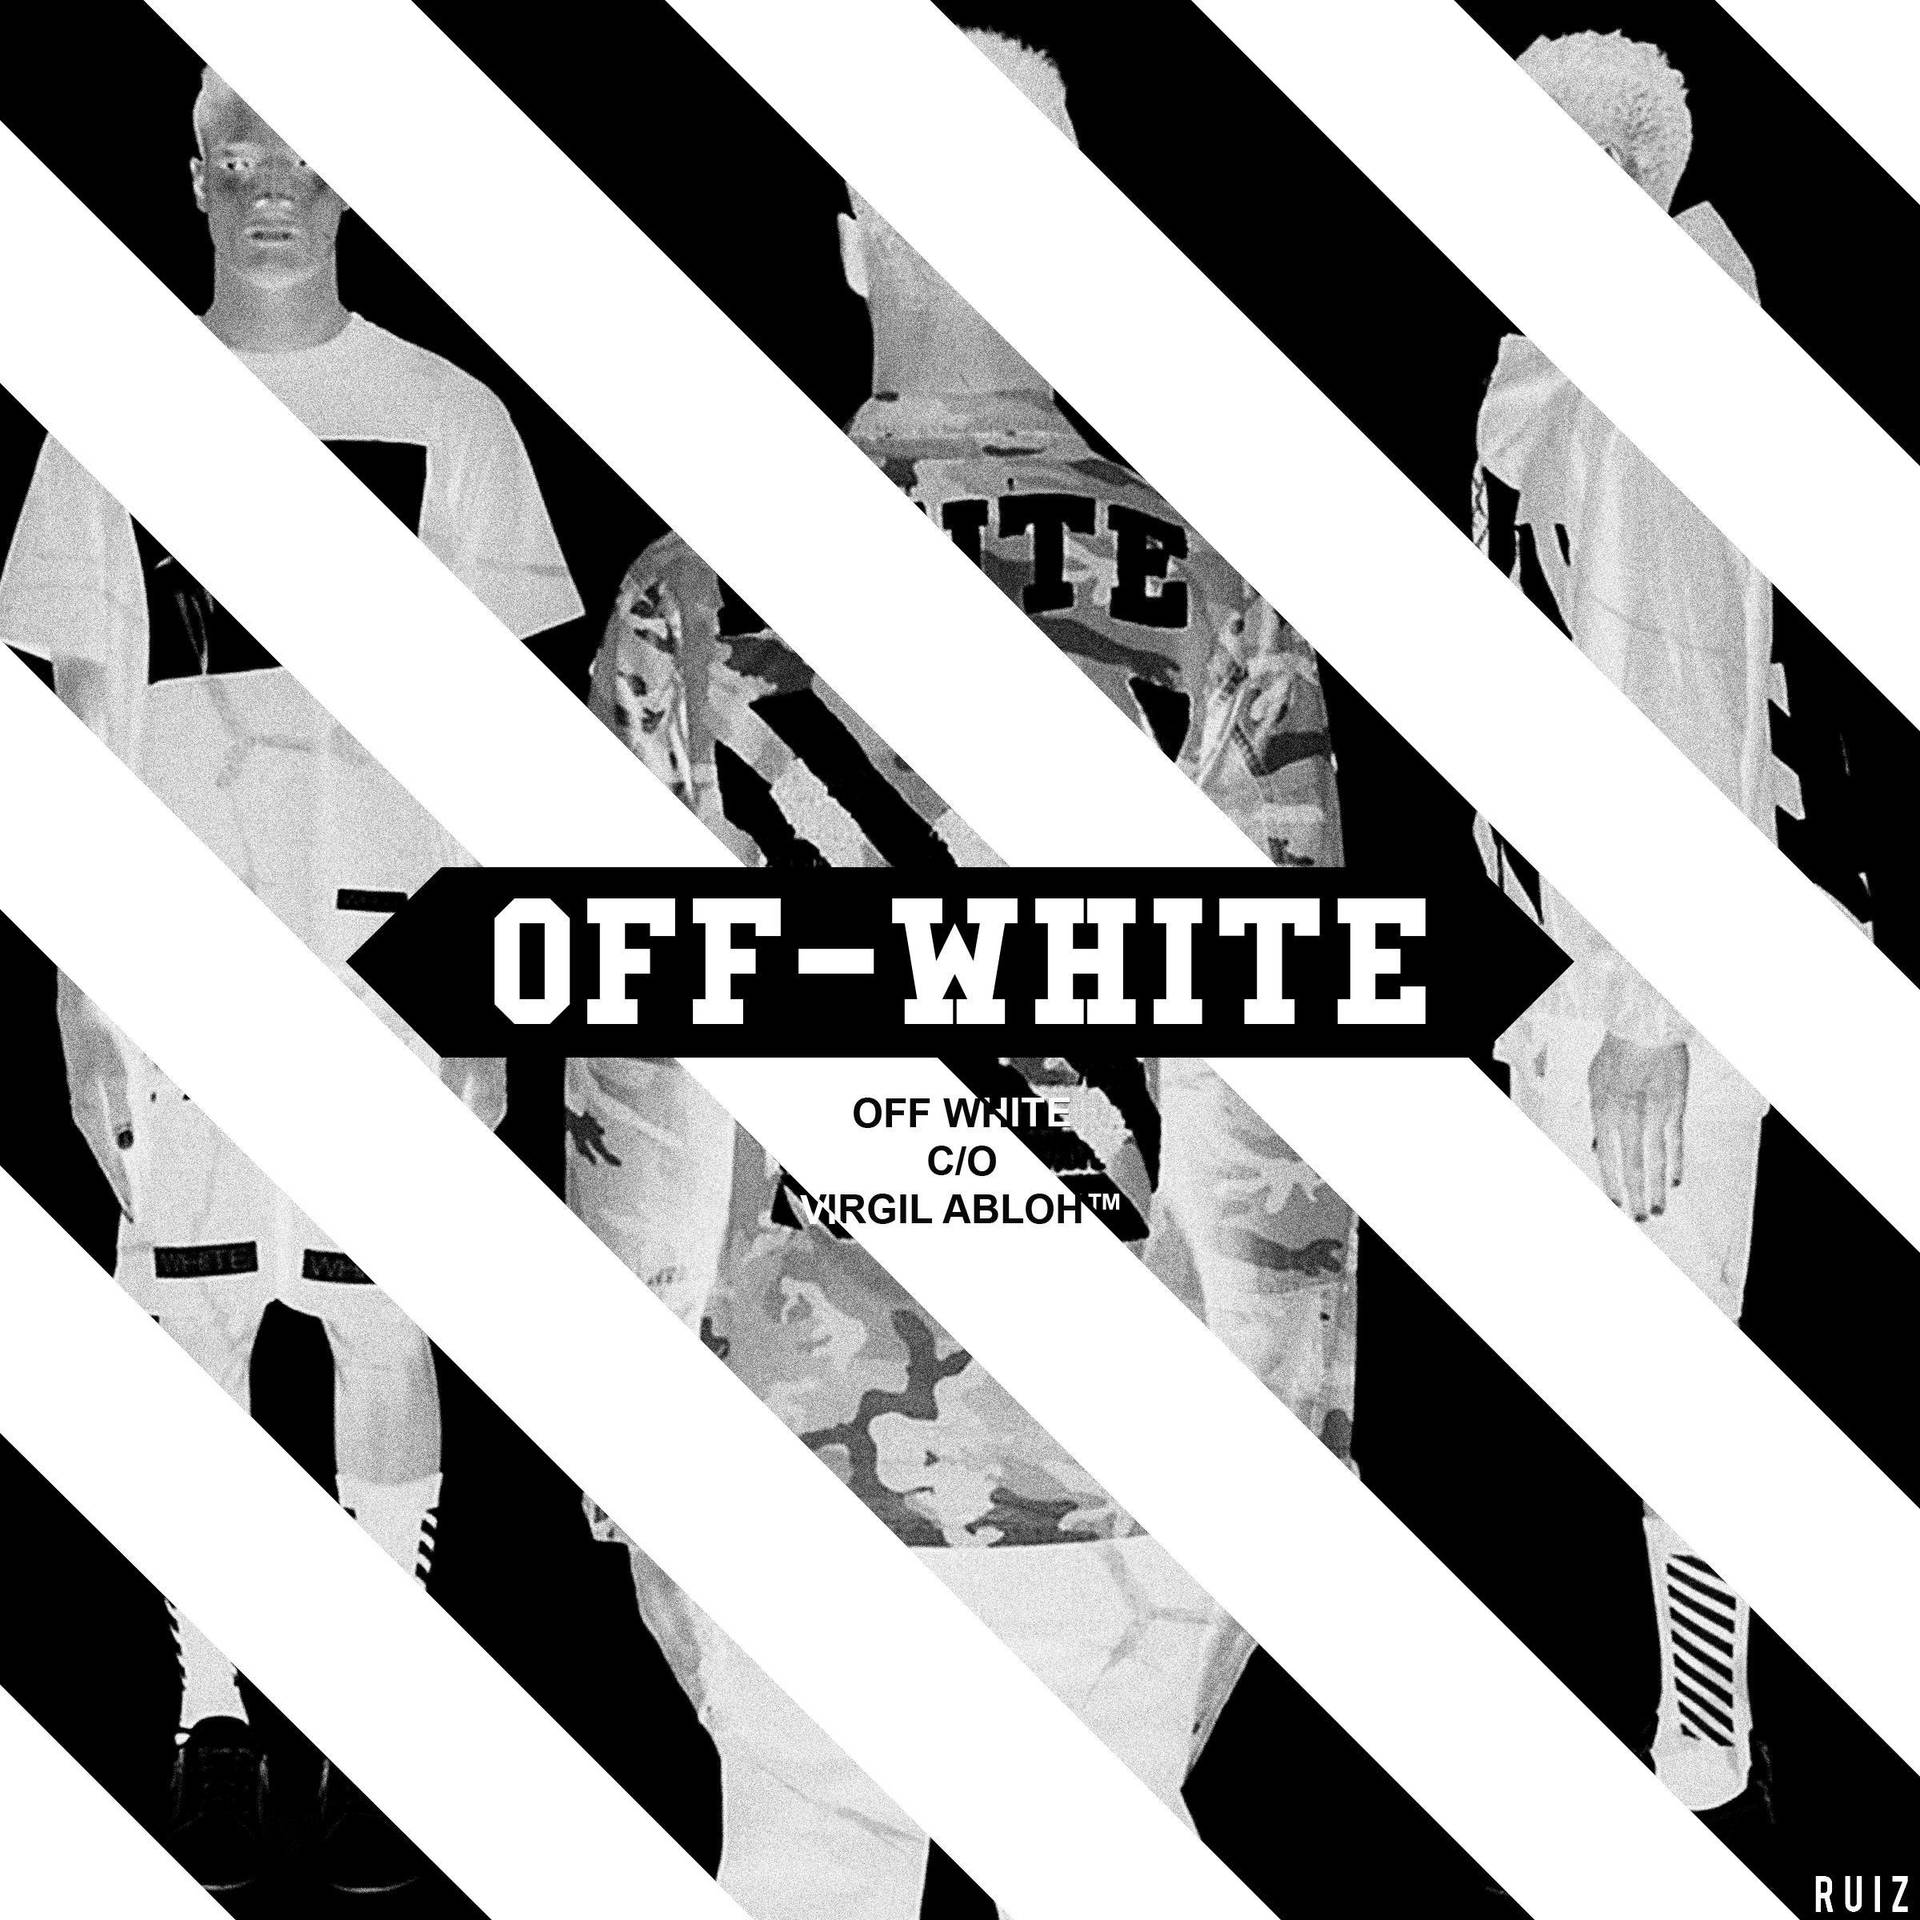 Off White 2400X2400 Wallpaper and Background Image